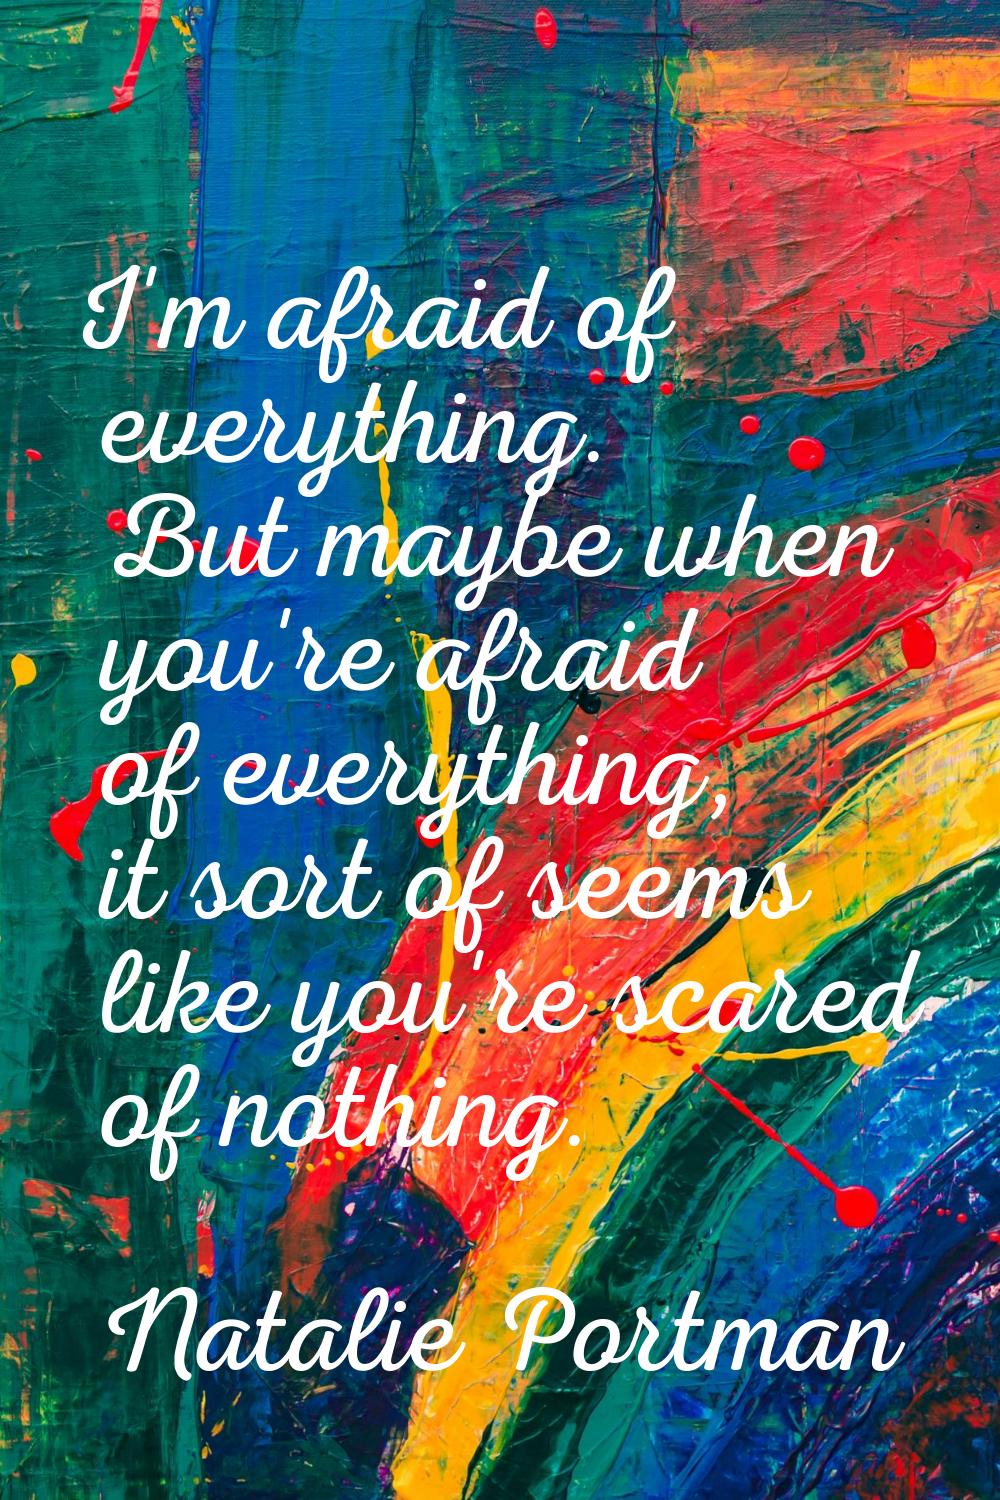 I'm afraid of everything. But maybe when you're afraid of everything, it sort of seems like you're 